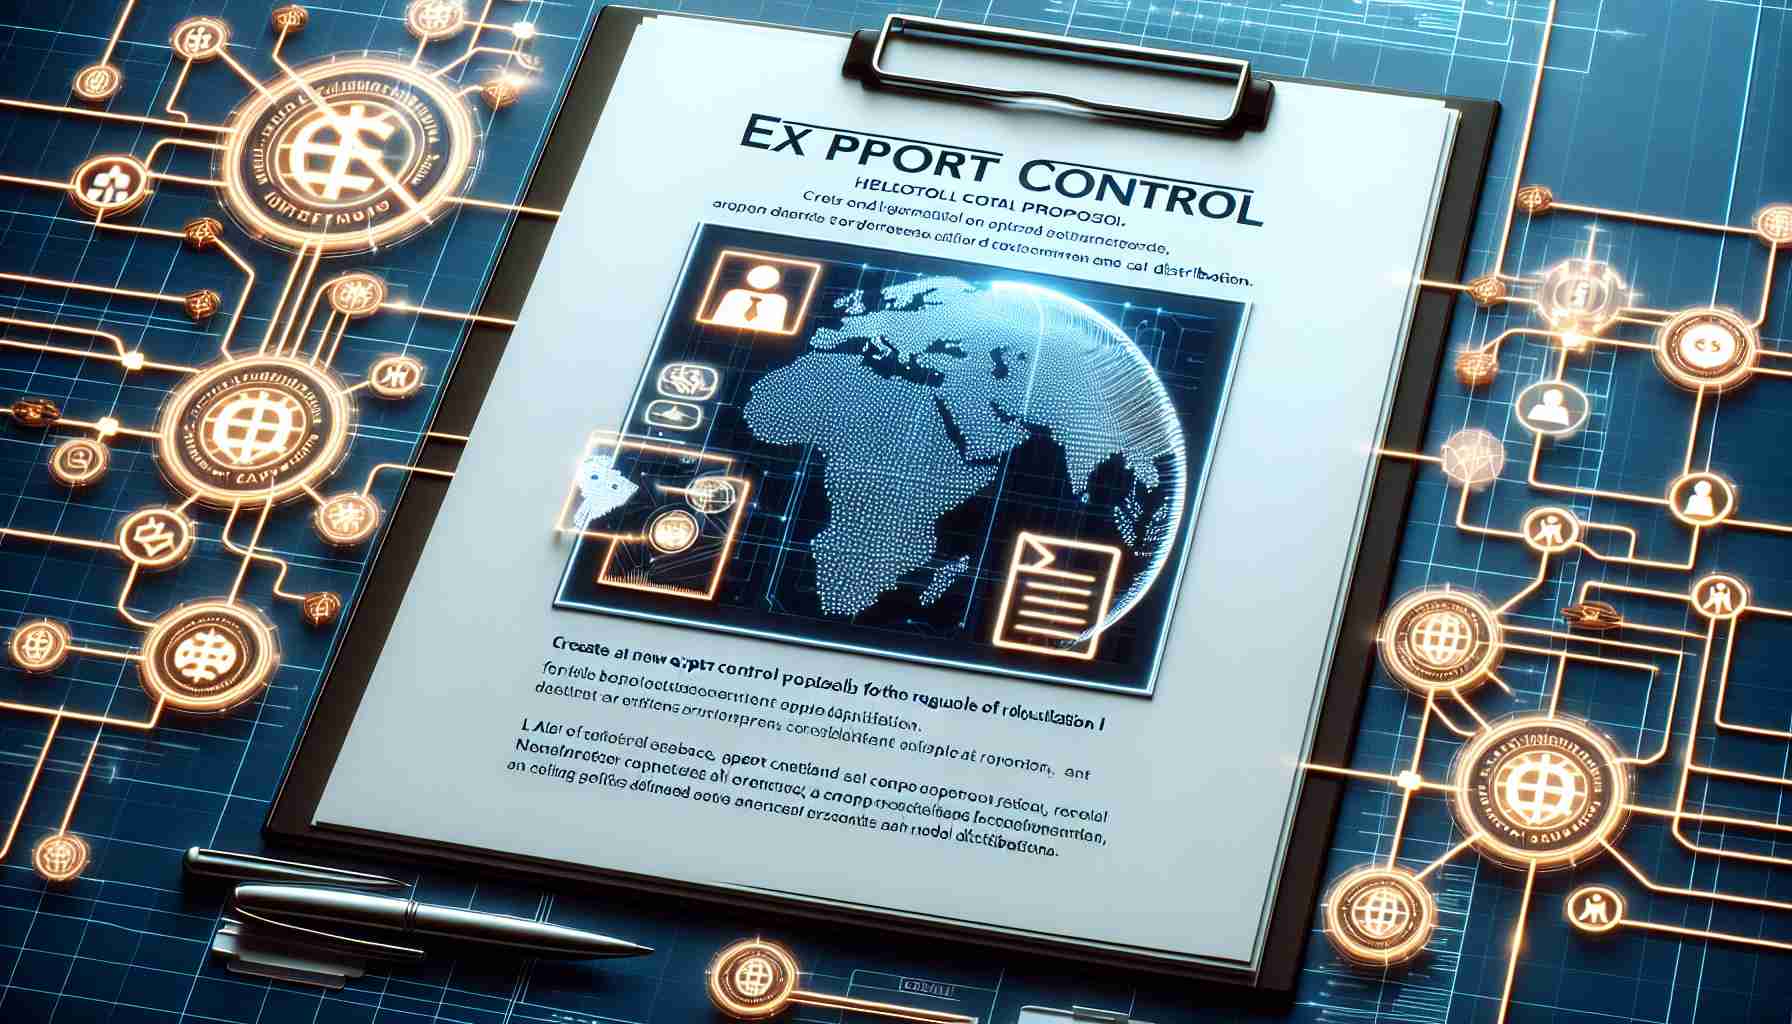 New Export Control Proposals Target Restriction on AI Model Distribution